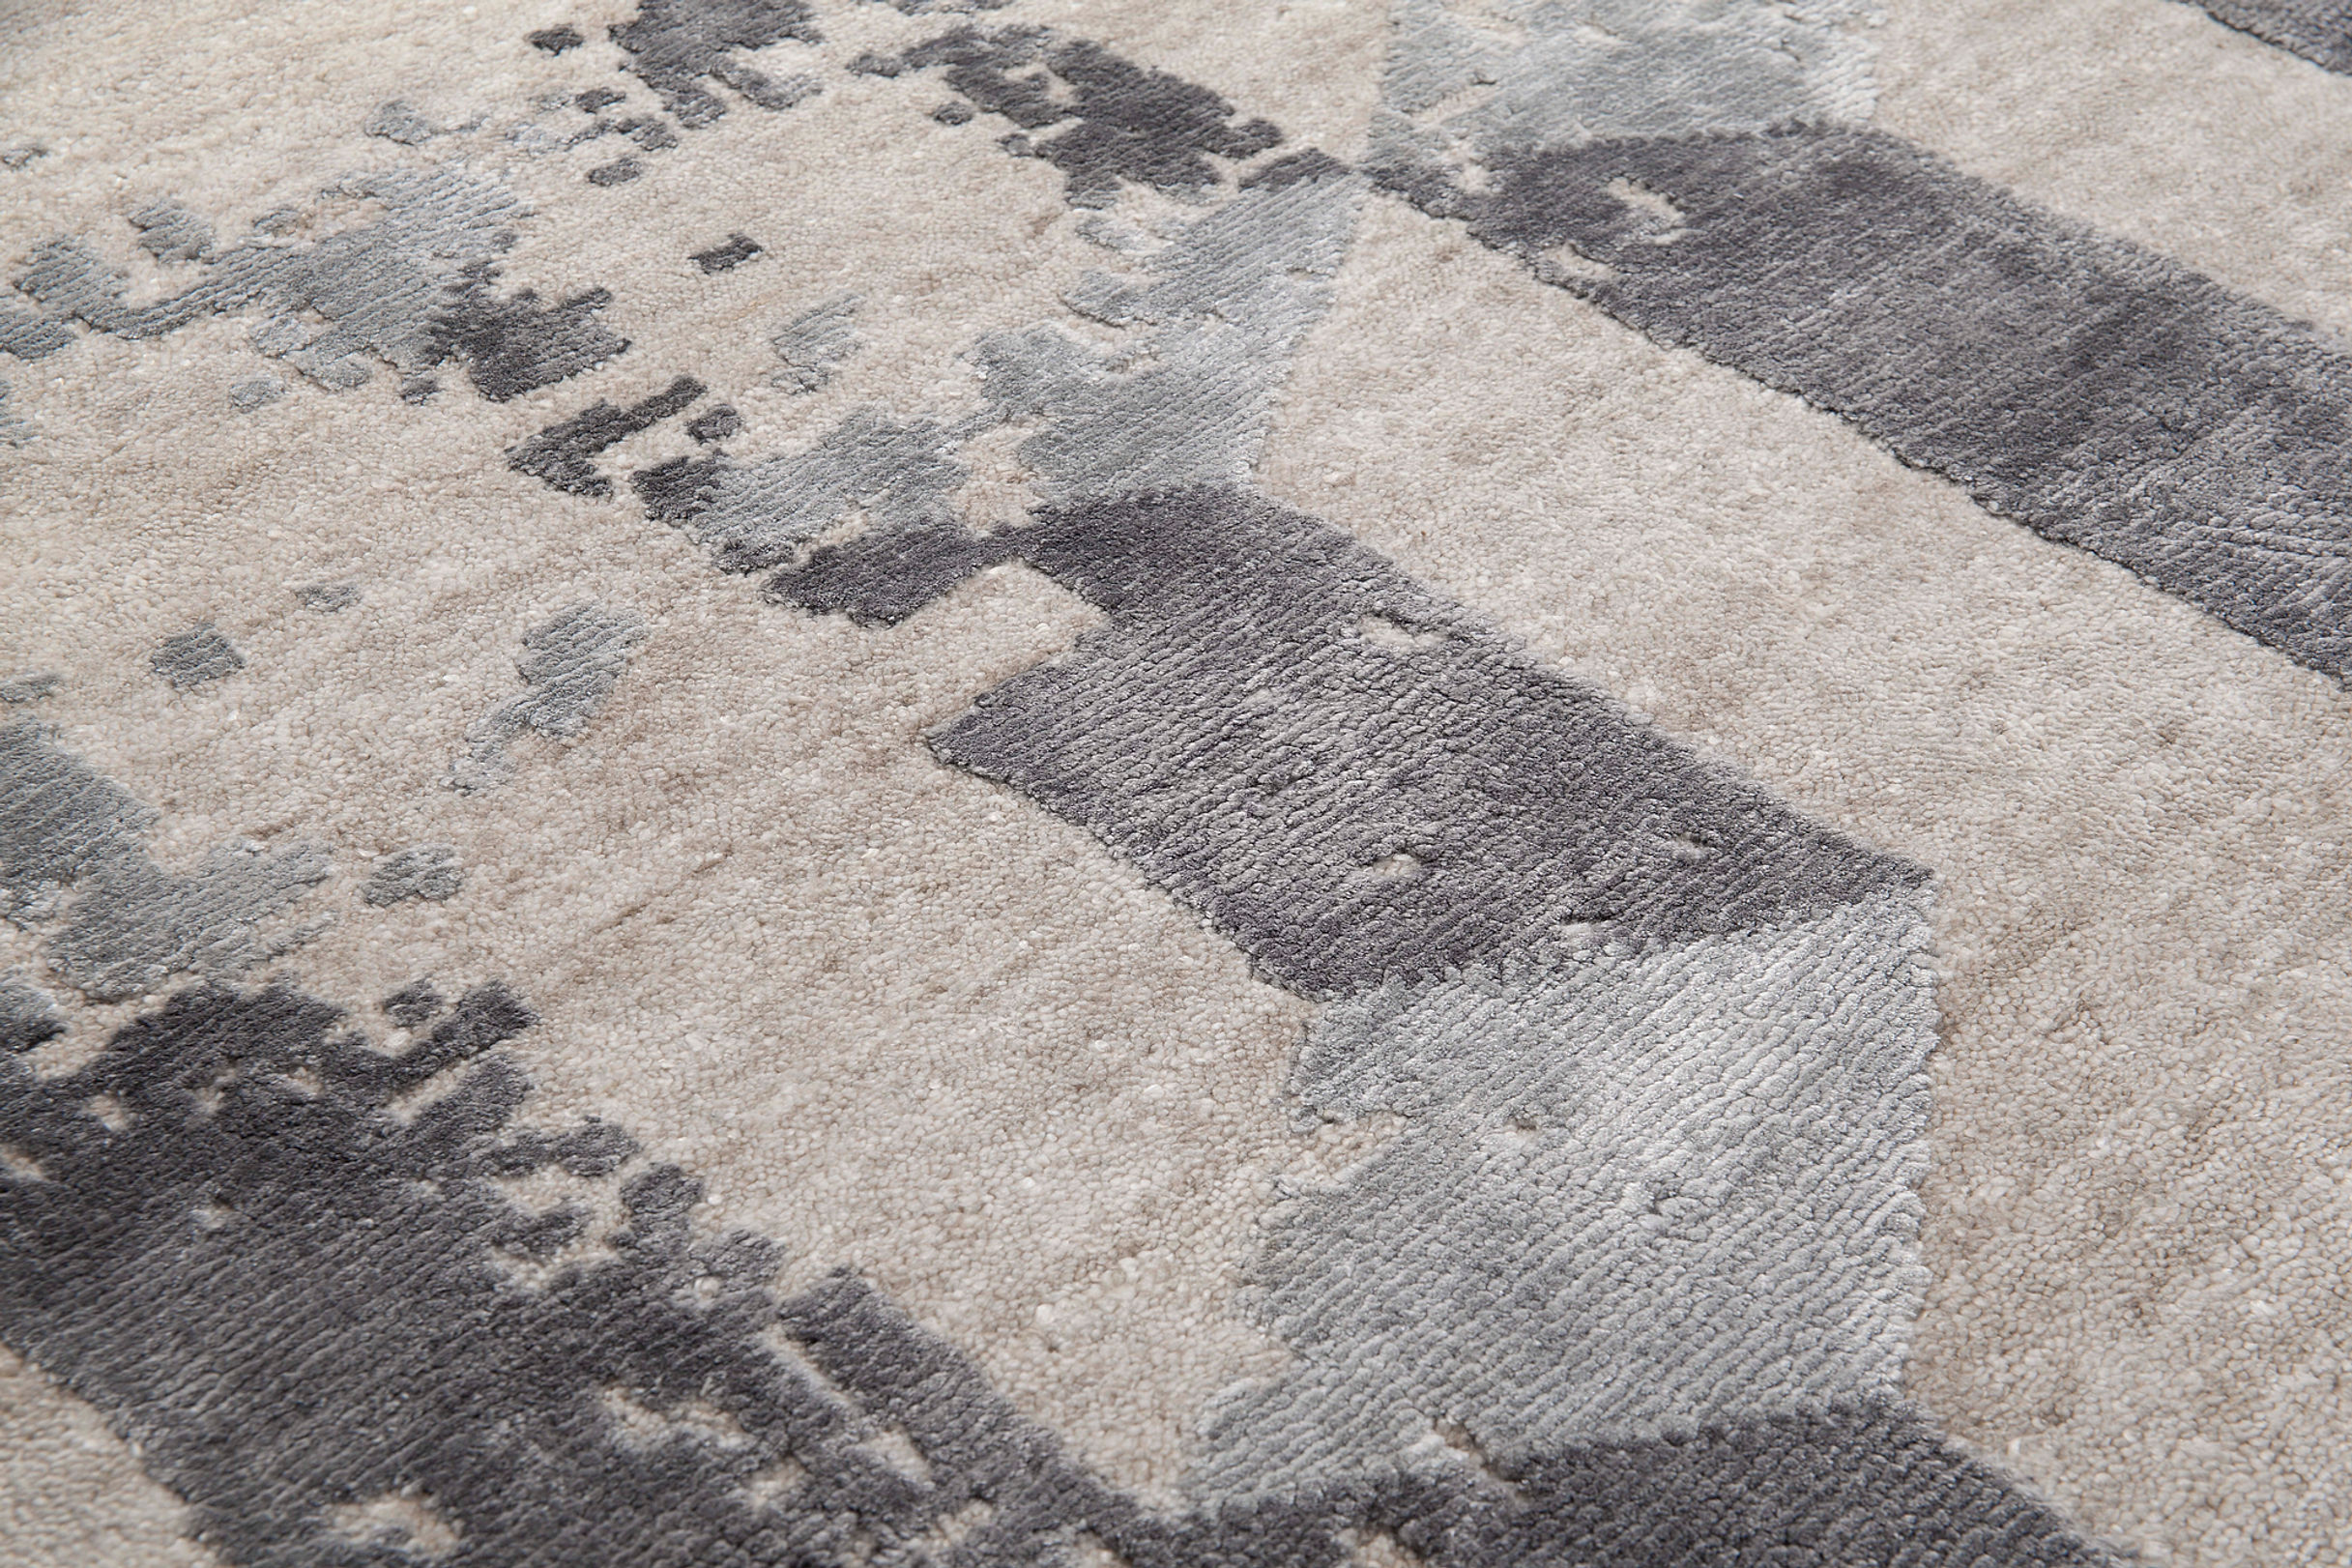 Faded Geometric Hand-Knotted Rug